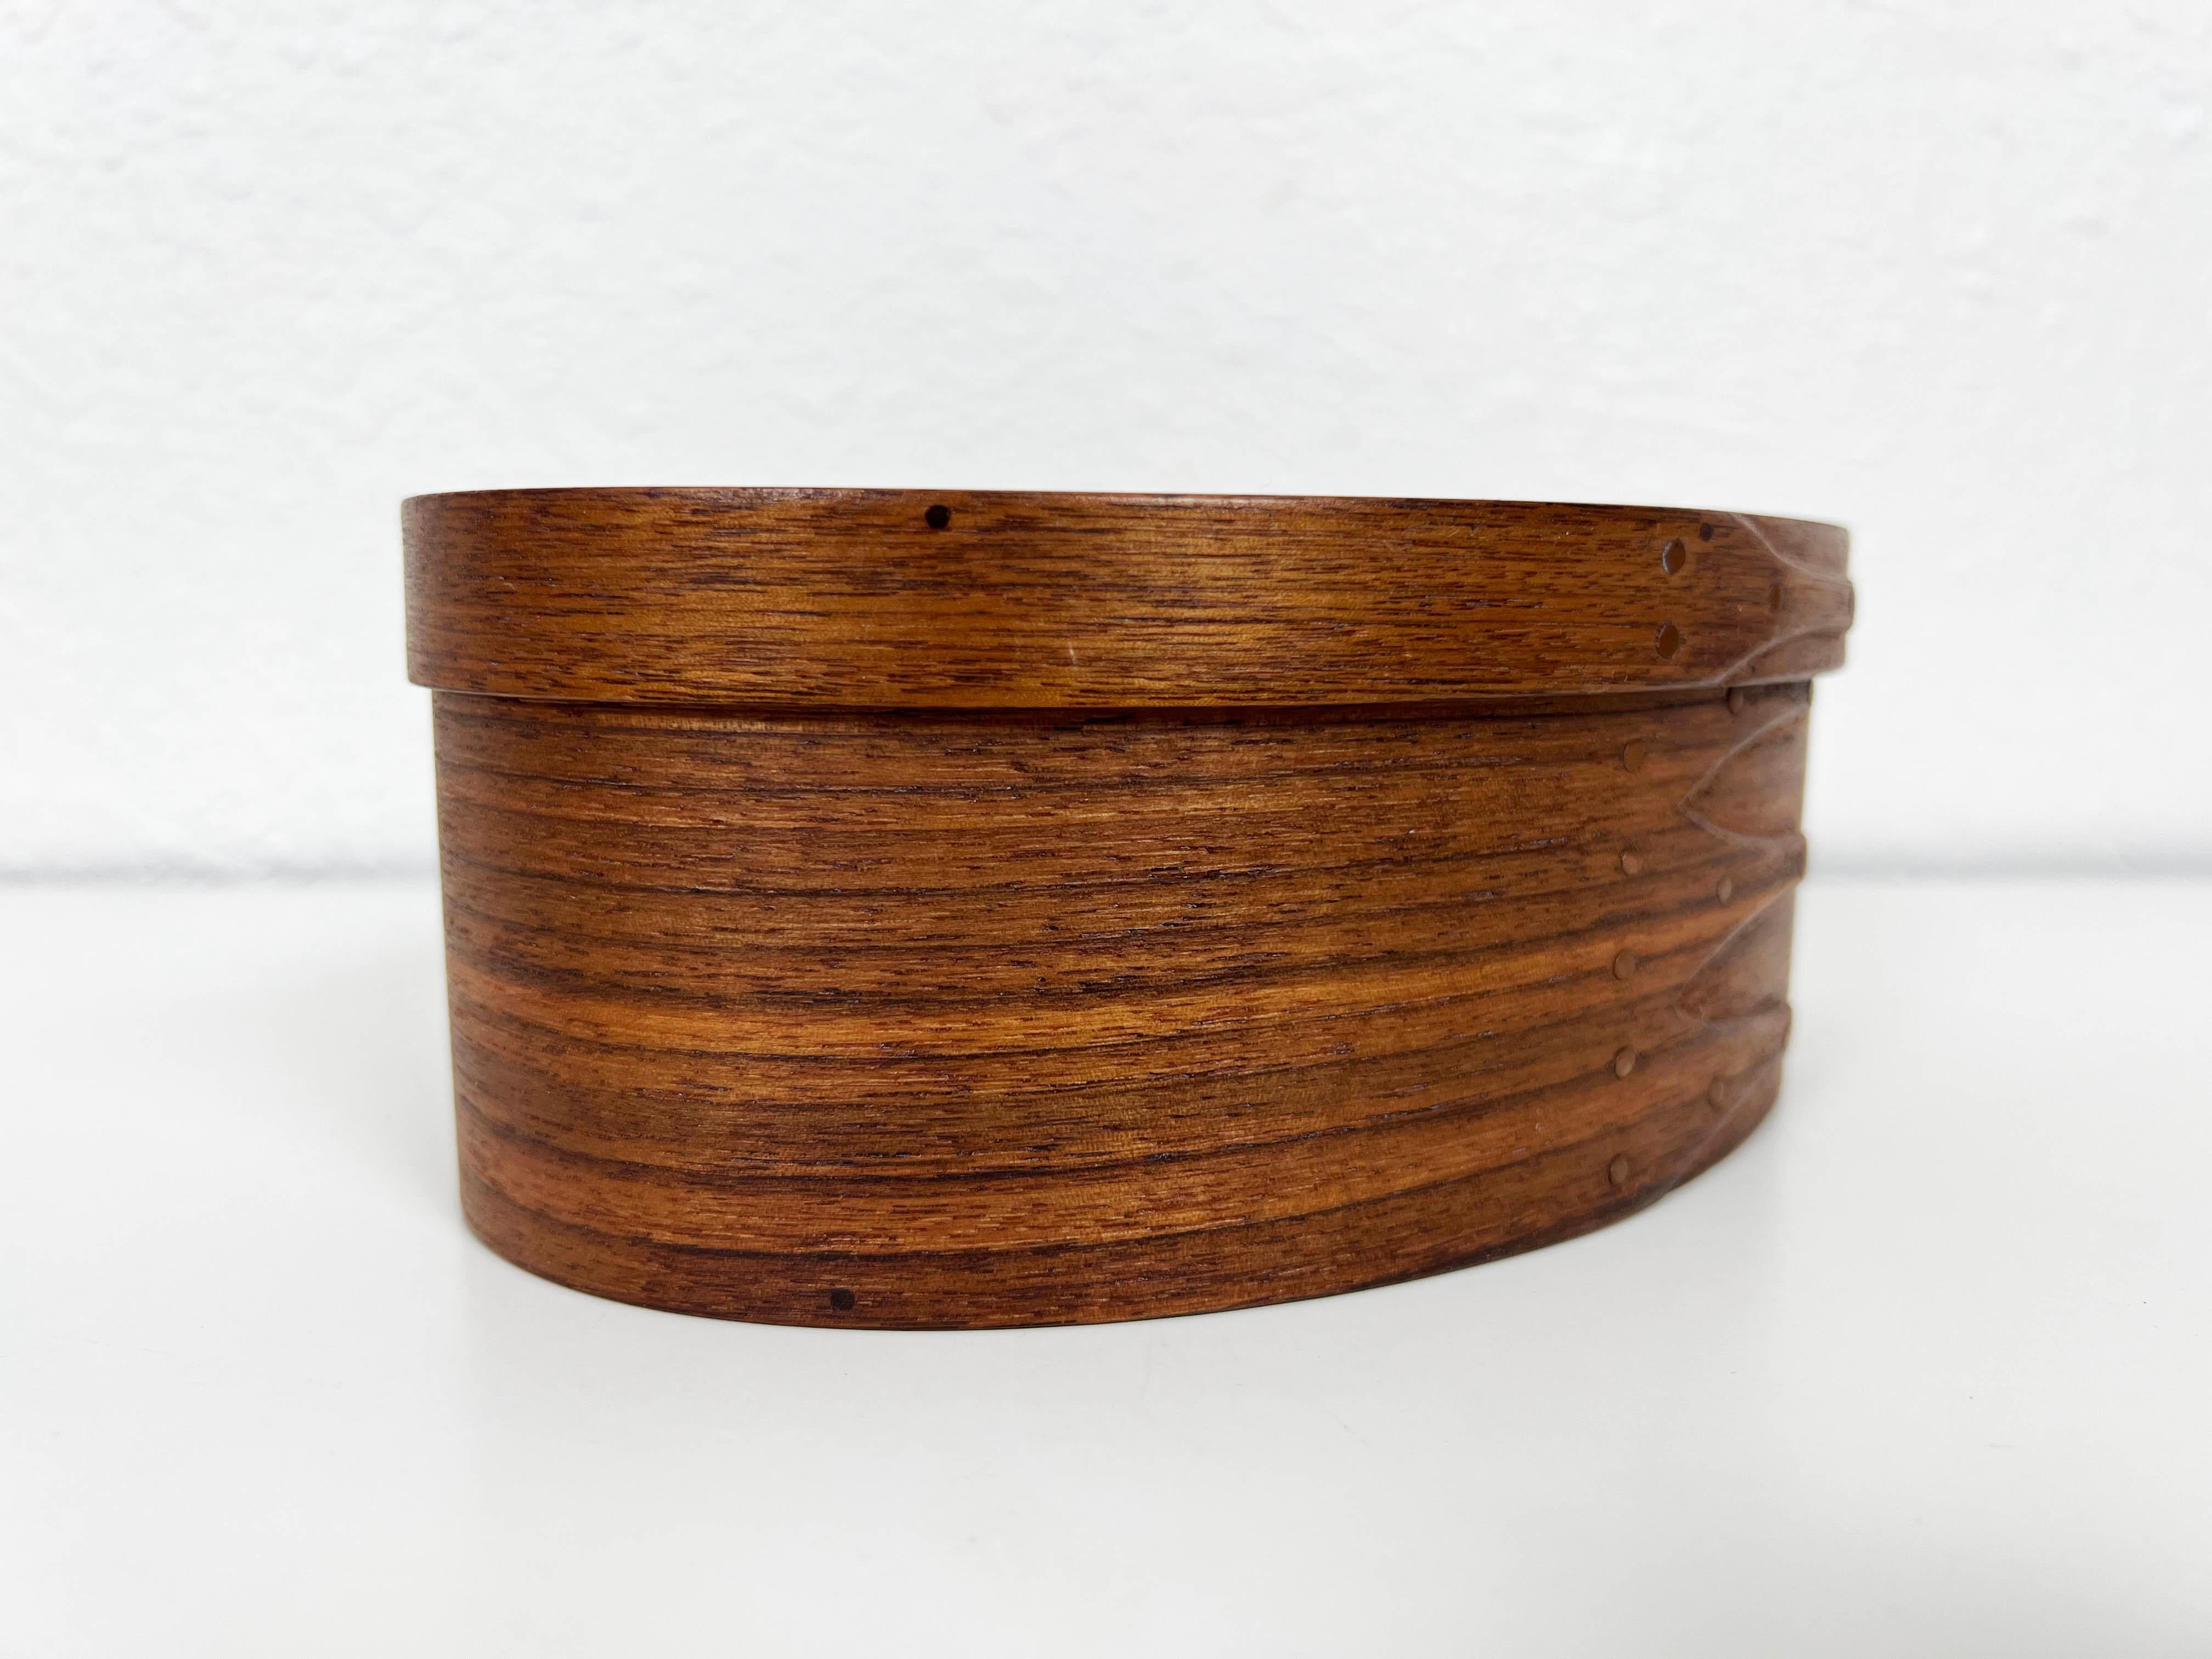 American Studio Crafted Teak and Walnut Burl Lidded Oval Box For Sale